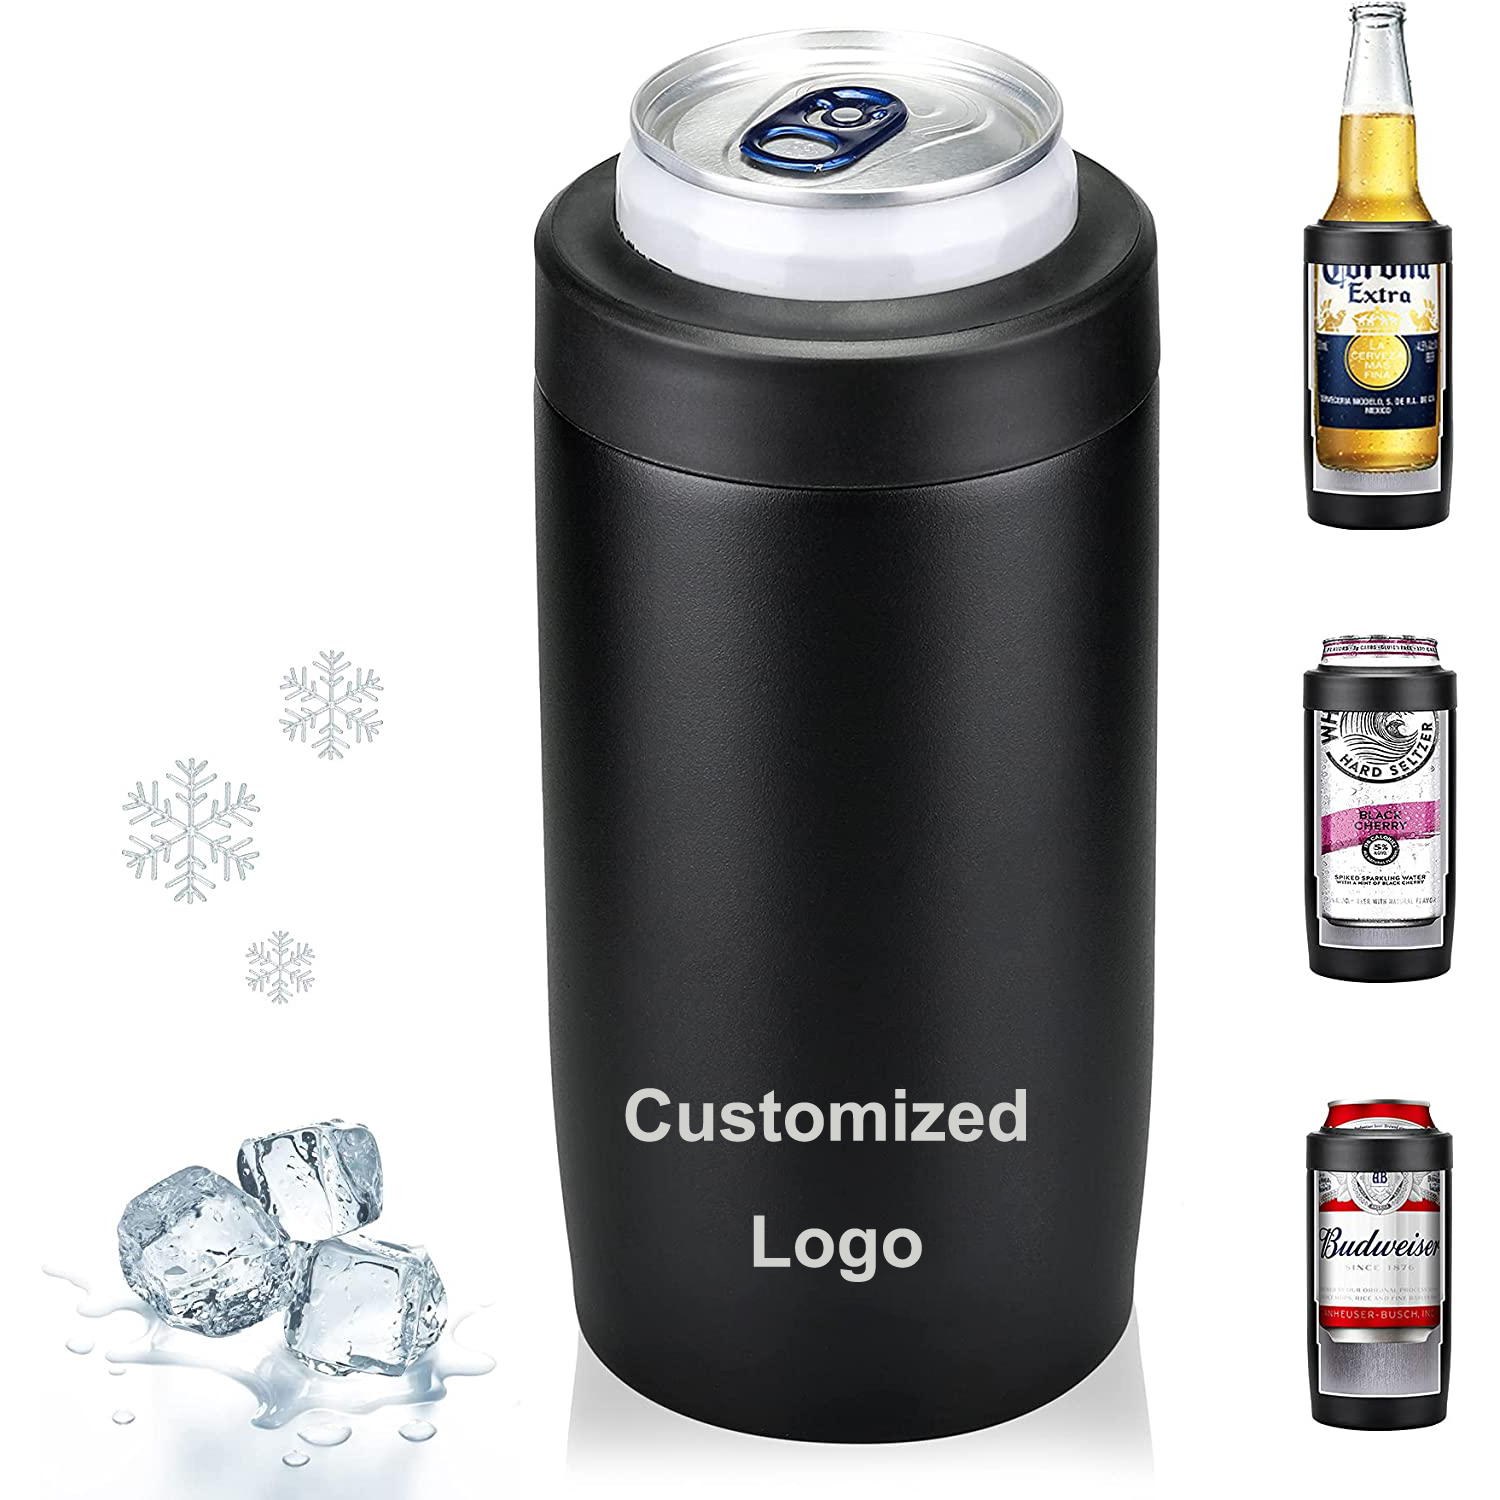 Why You Need A Double Wall Insulated Beer Cooler For Your Home Bar